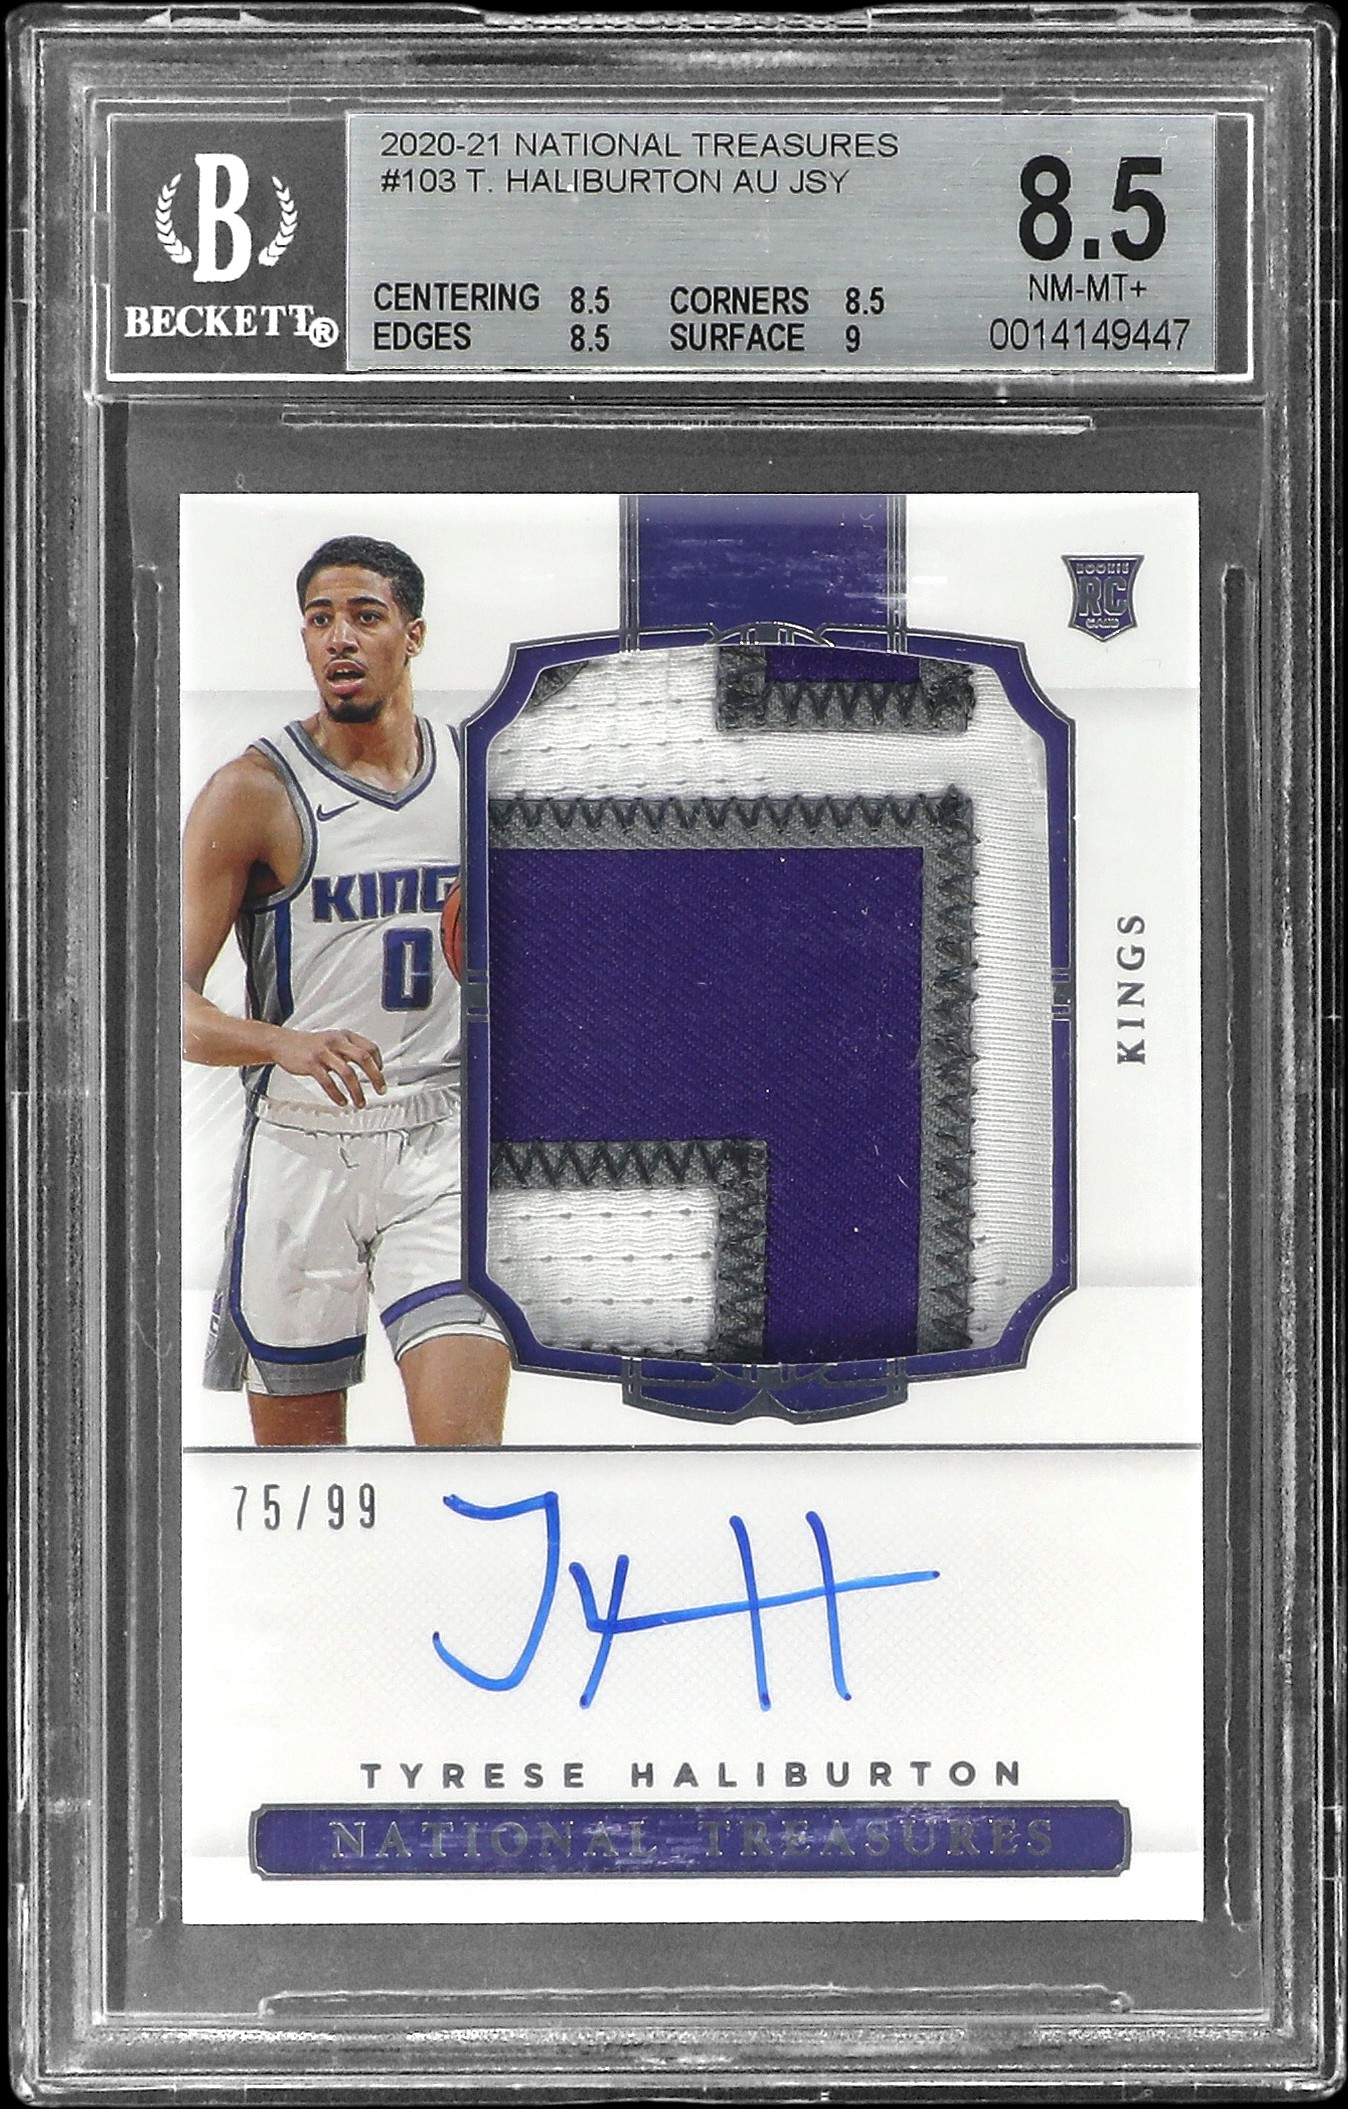 2020-21 Panini National Treasures Rookie Patch Autograph (RPA) #103 Tyrese Haliburton Signed Patch Rookie Card (#75/99) - BGS NM-MT+ 8.5, Beckett 10
